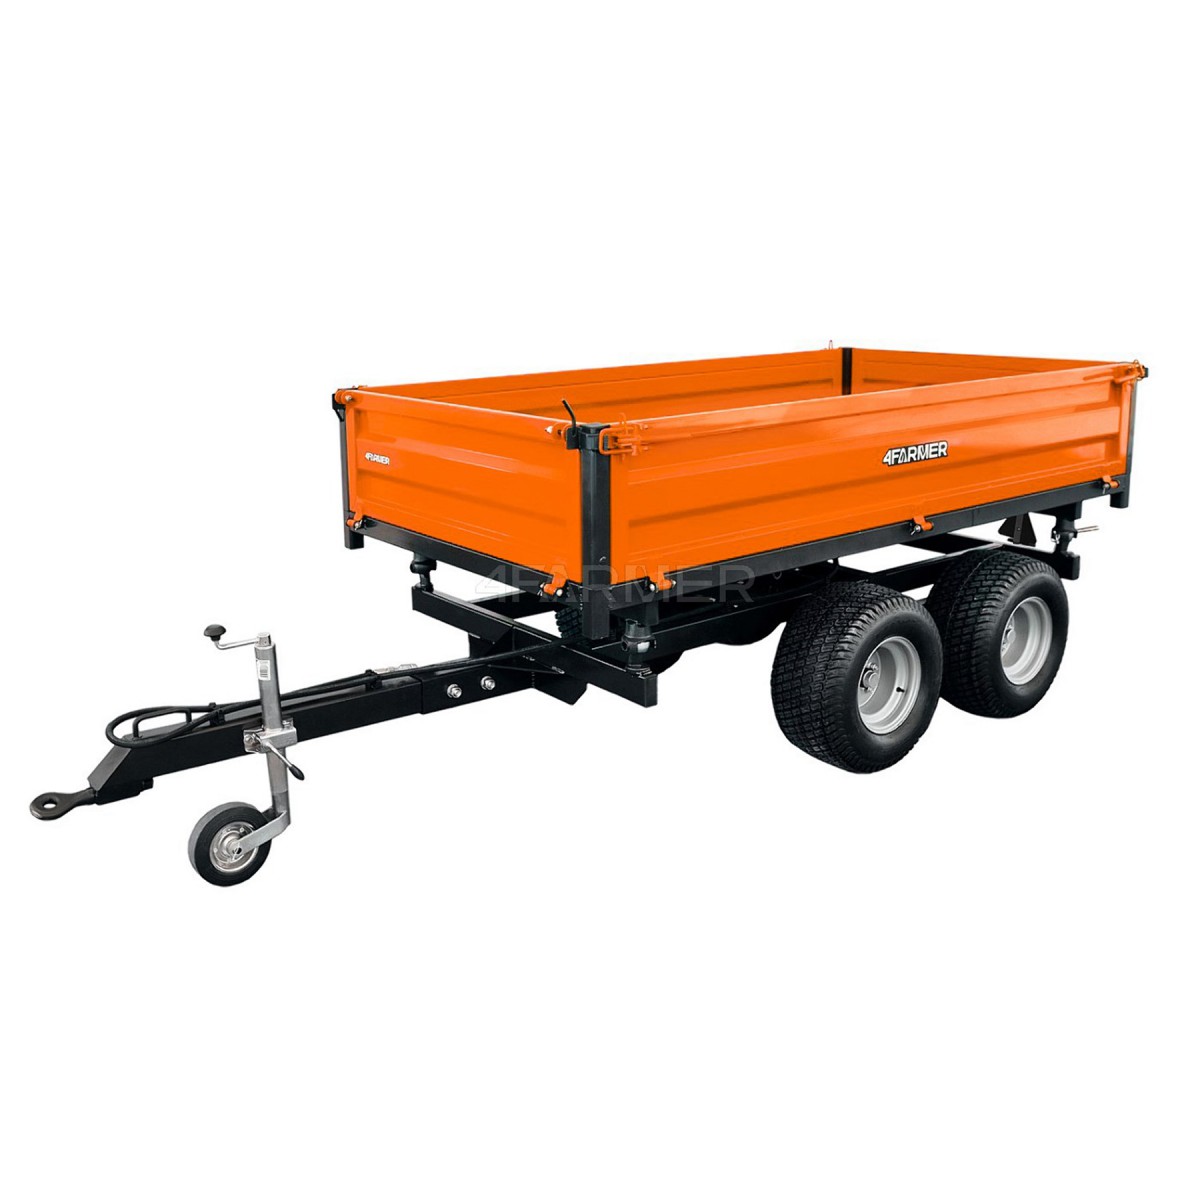 Two-axle agricultural trailer 2.5T with a 4FARMER trailer